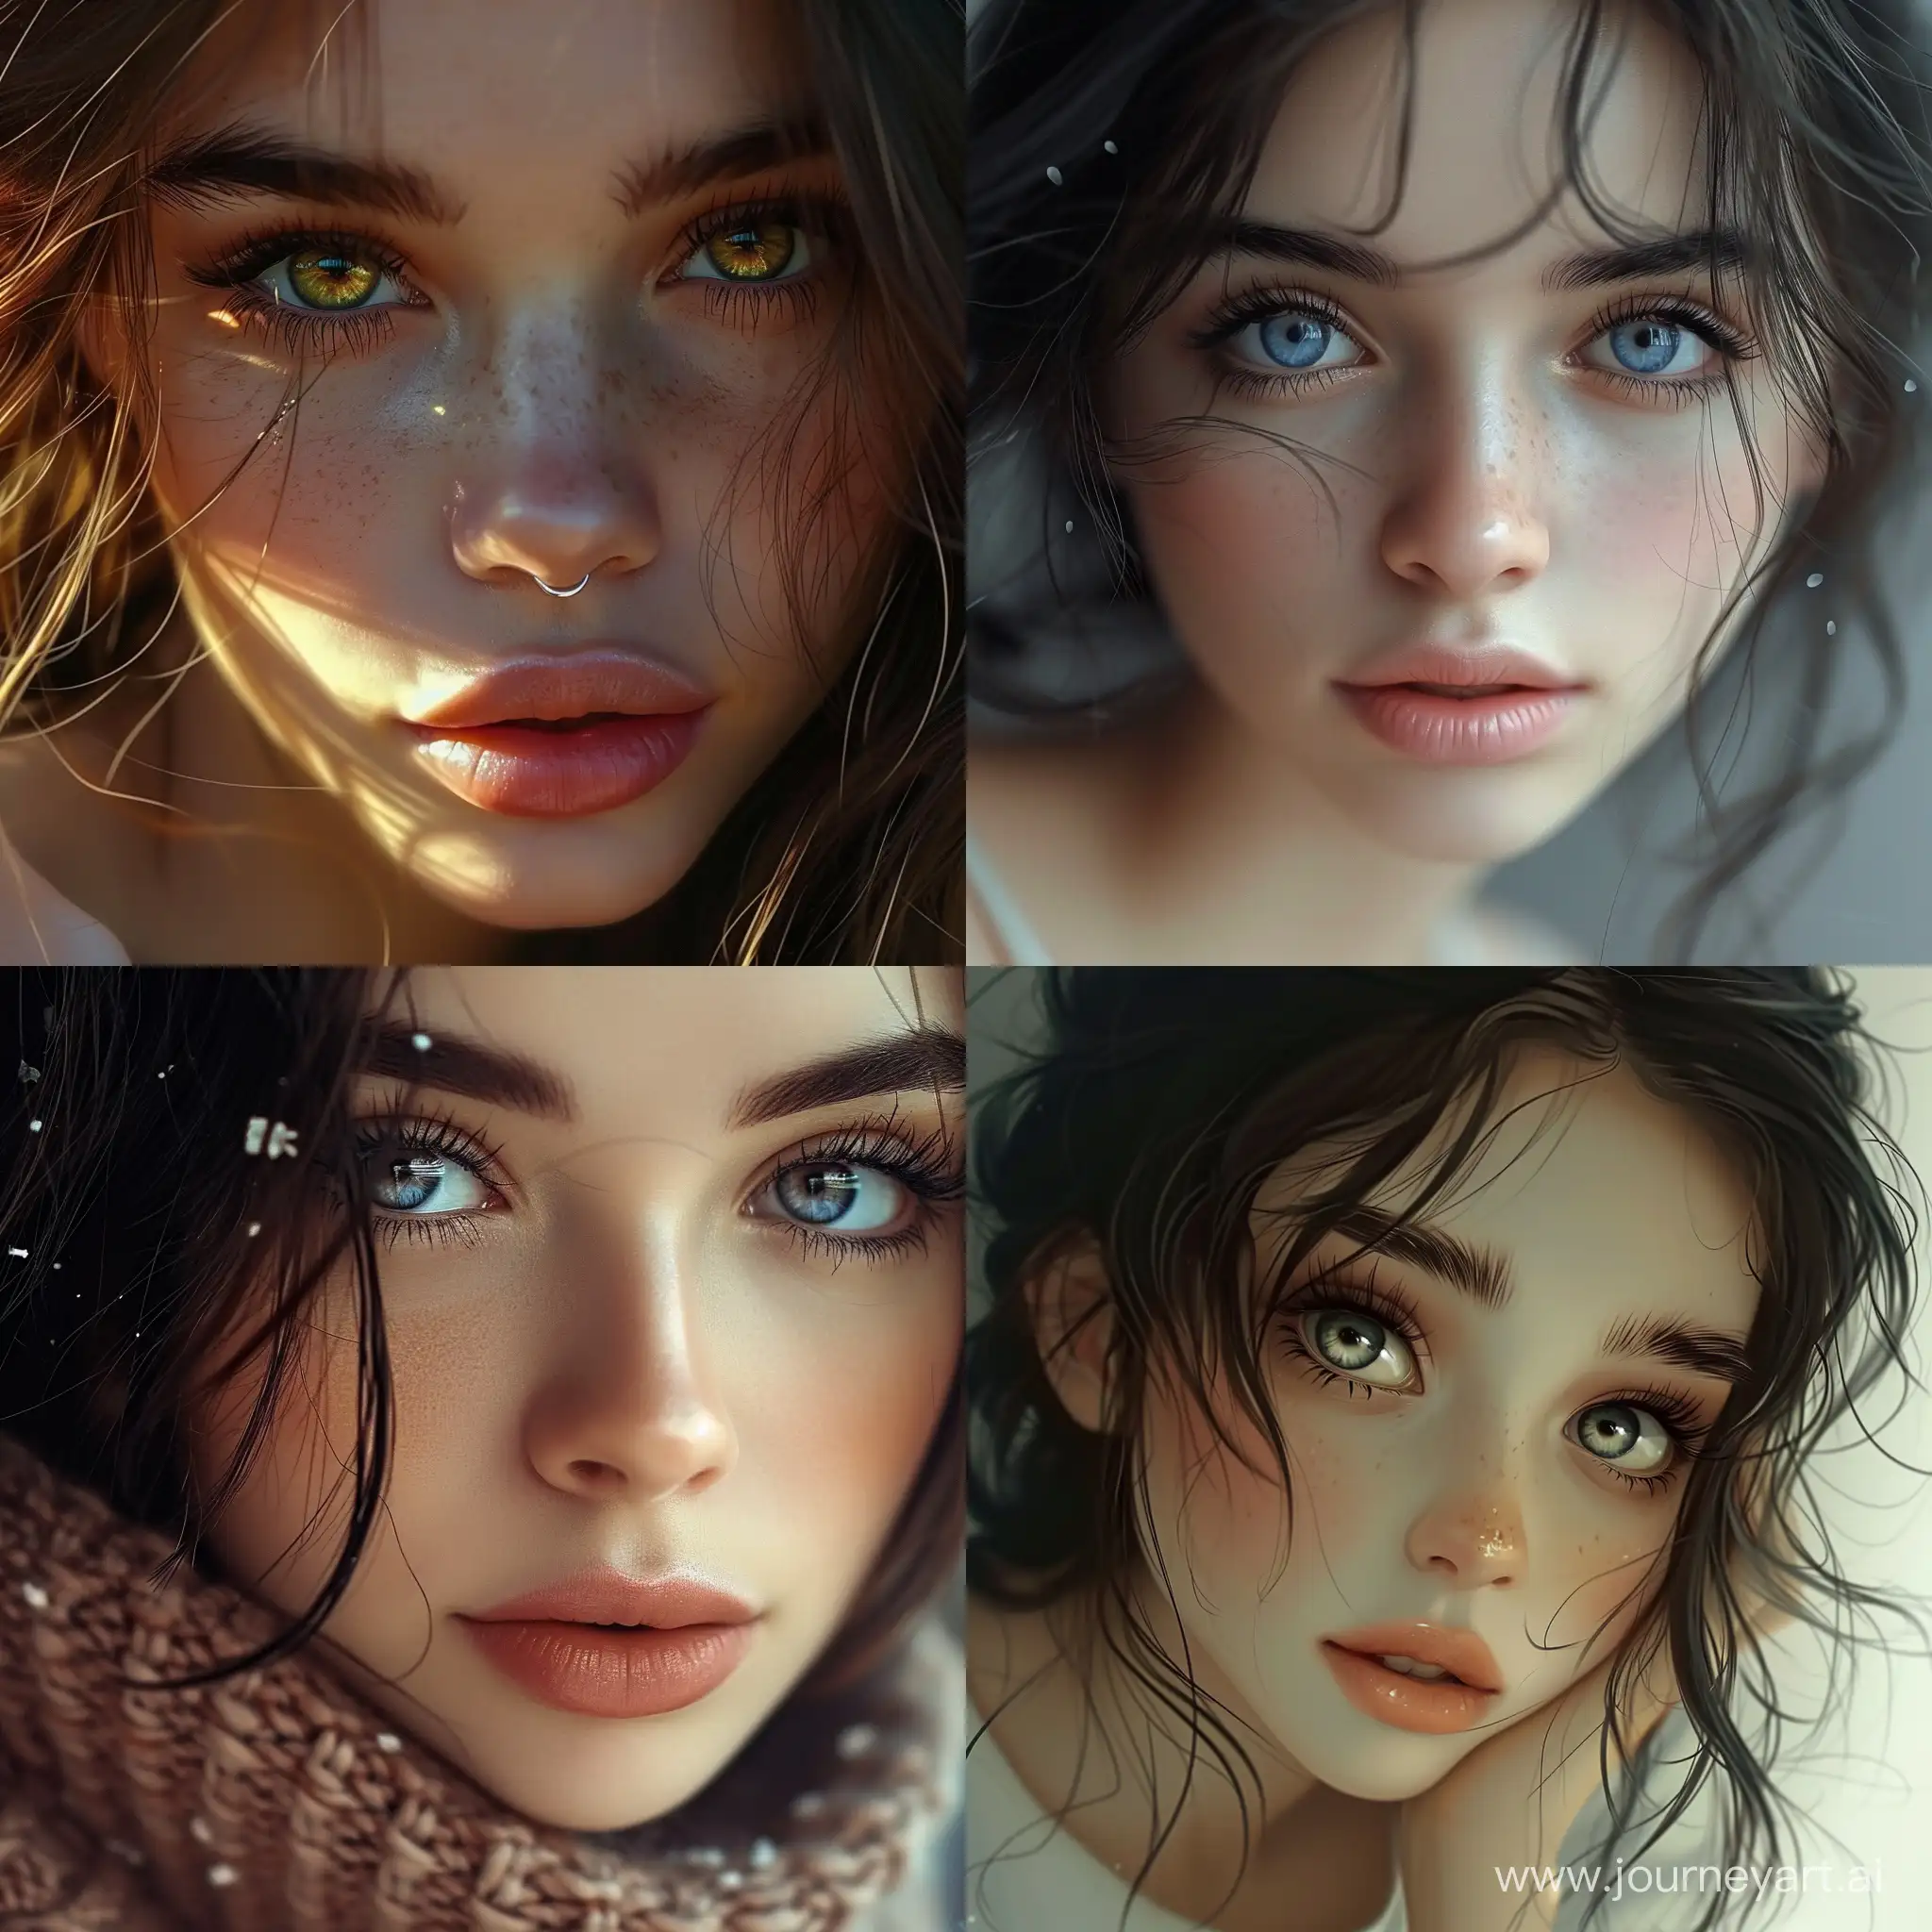 Captivating-Portrait-of-a-Beautiful-Girl-with-Enchanting-Eyes